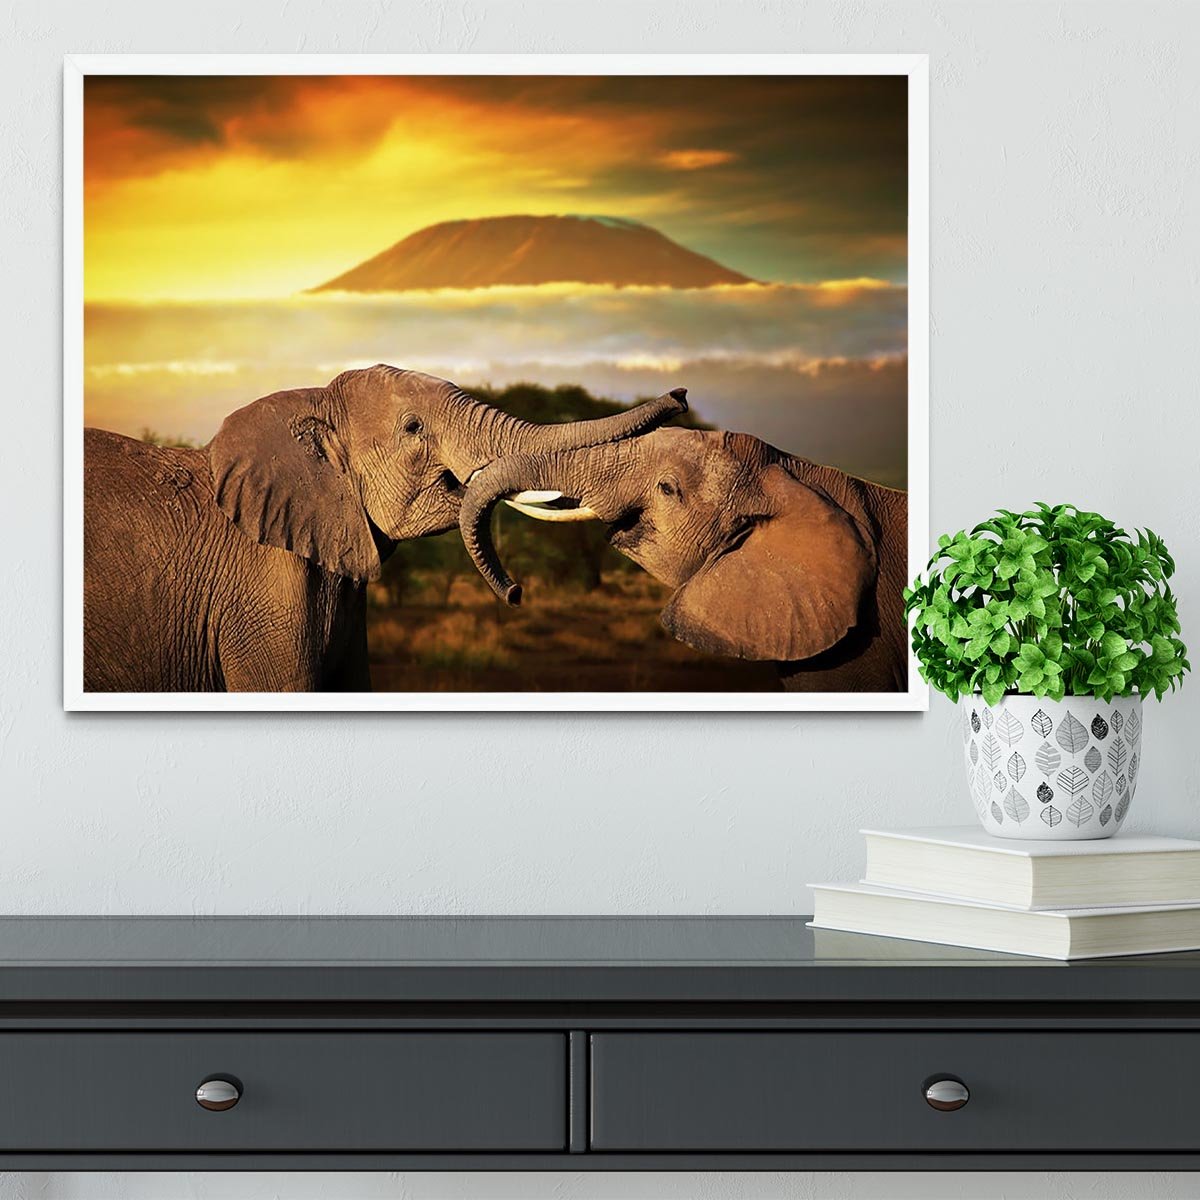 Elephants playing with their trunks Framed Print - Canvas Art Rocks -6